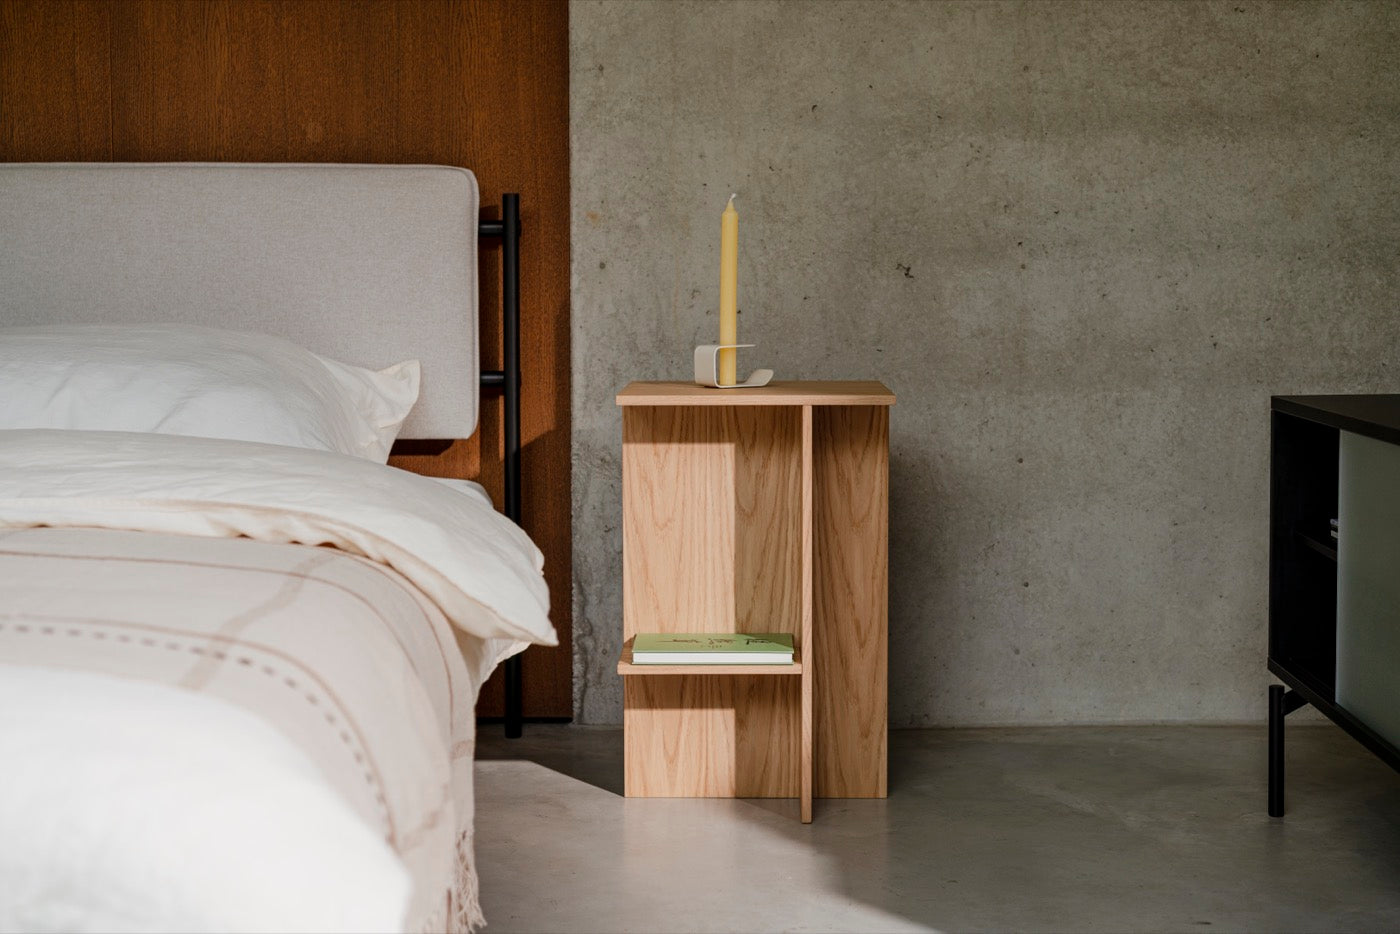 Sleep in style with our modern bedroom furniture designed to elevate your space and enhance your rest. Get inspired by cozy and aesthetic bedroom ideas featuring beds with headboards, bedside tables, benches, ambient lighting, and more.